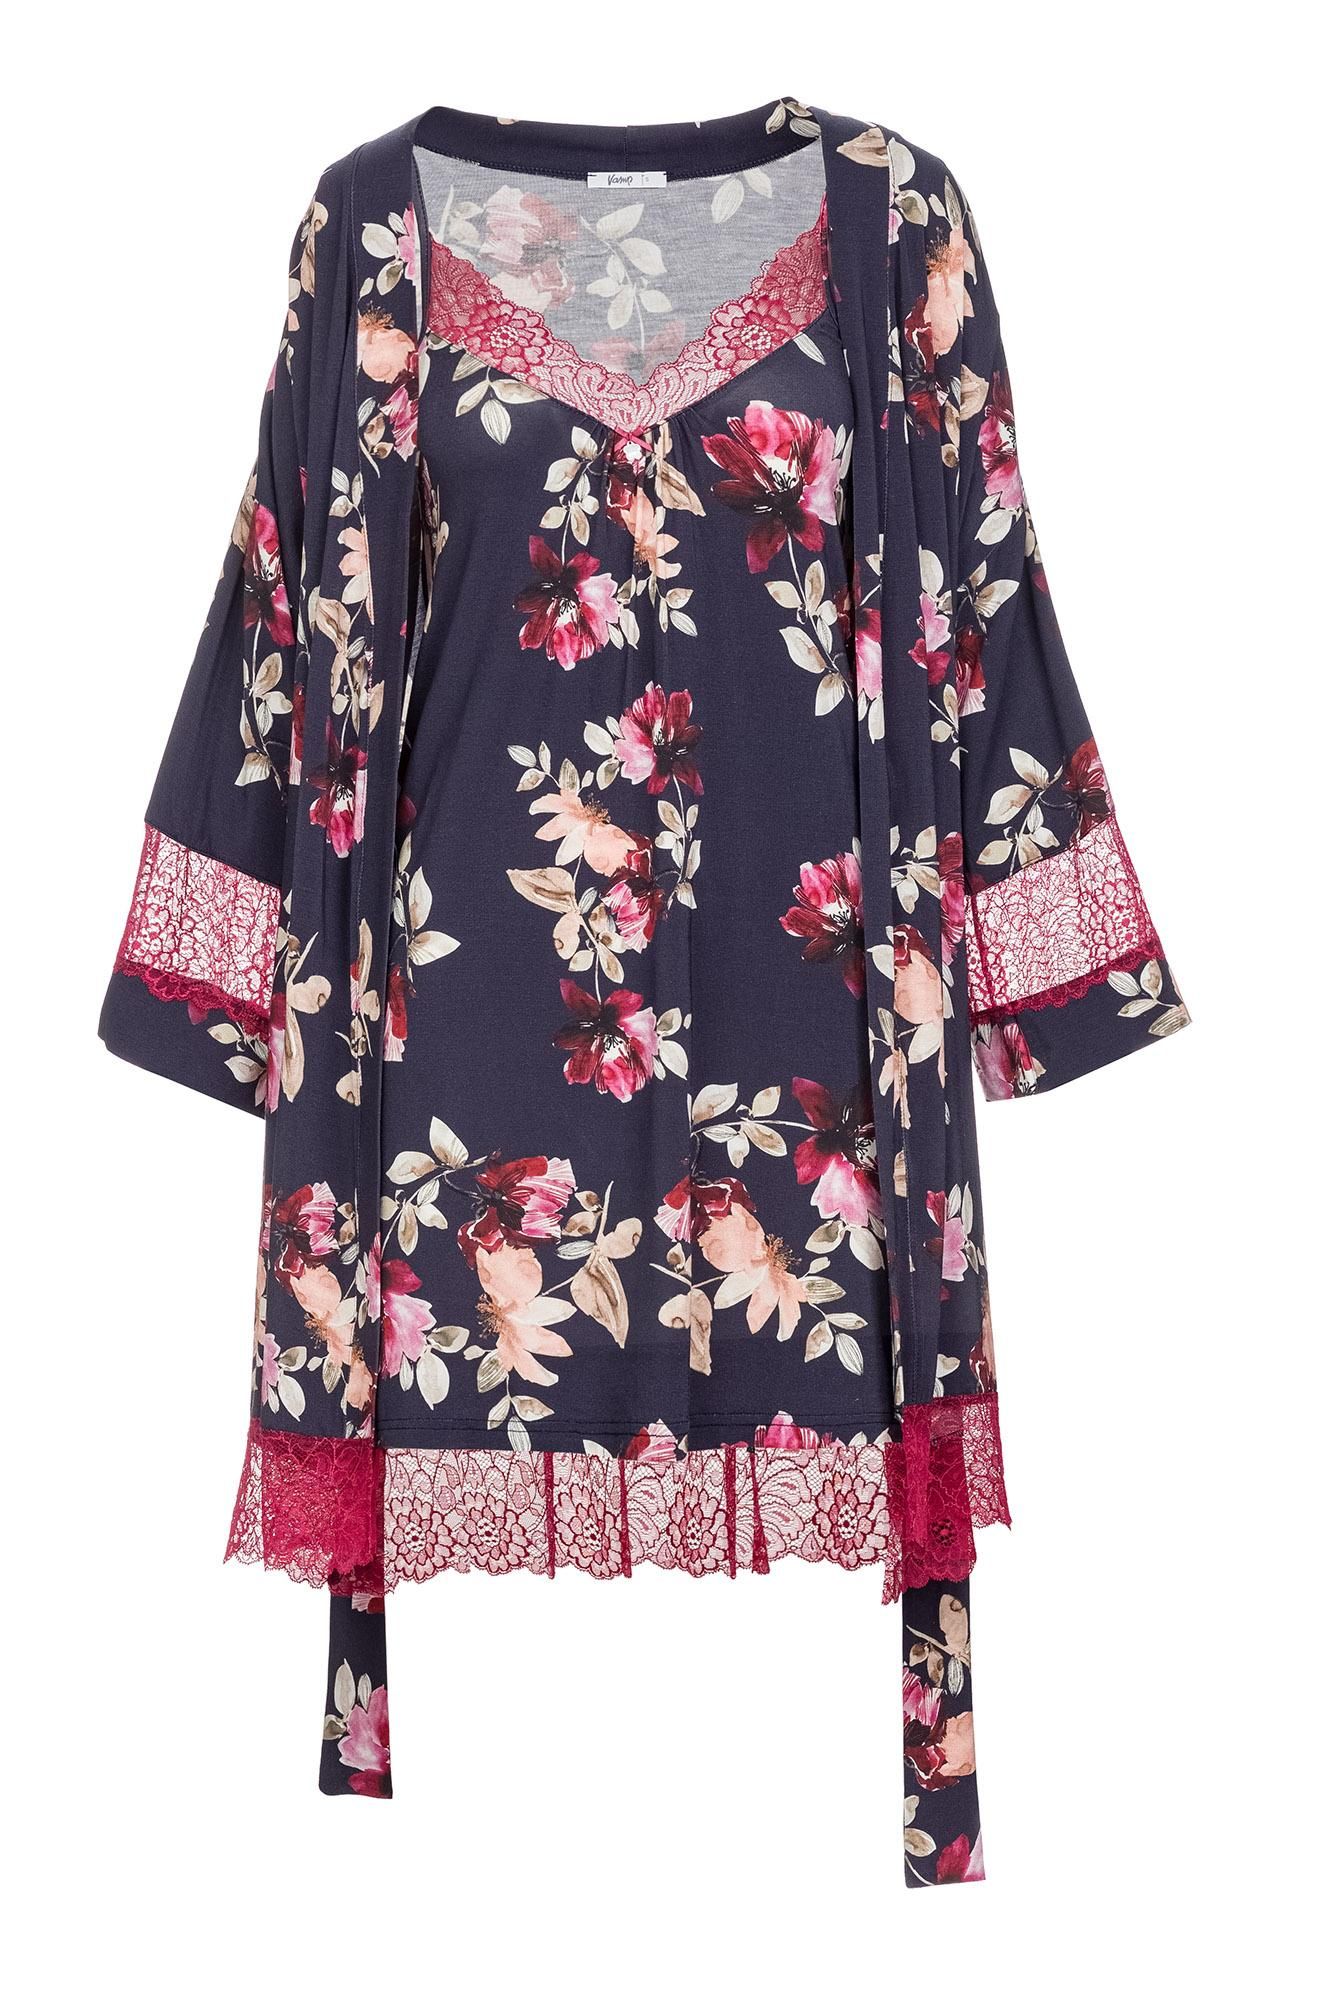 Women’s Floral Nightgown and Robe